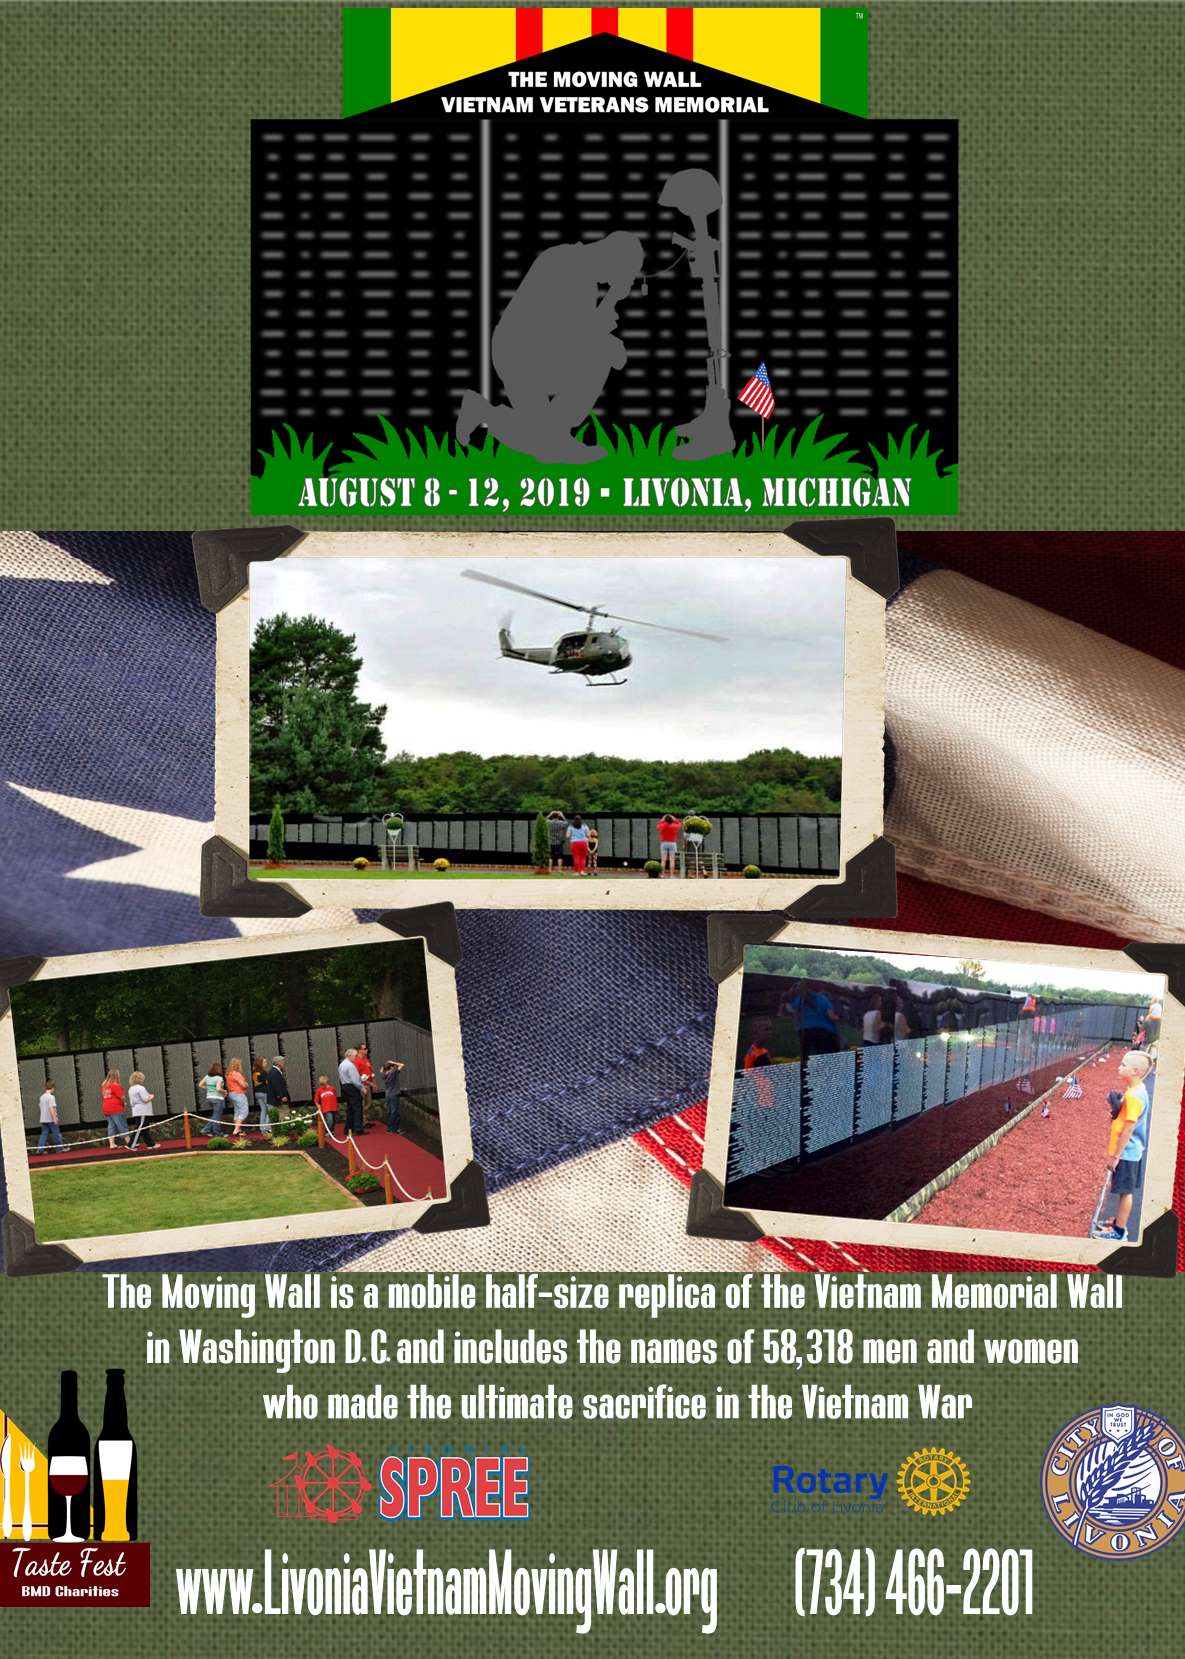 Opening Ceremony at Livonia Vietnam Moving Wall